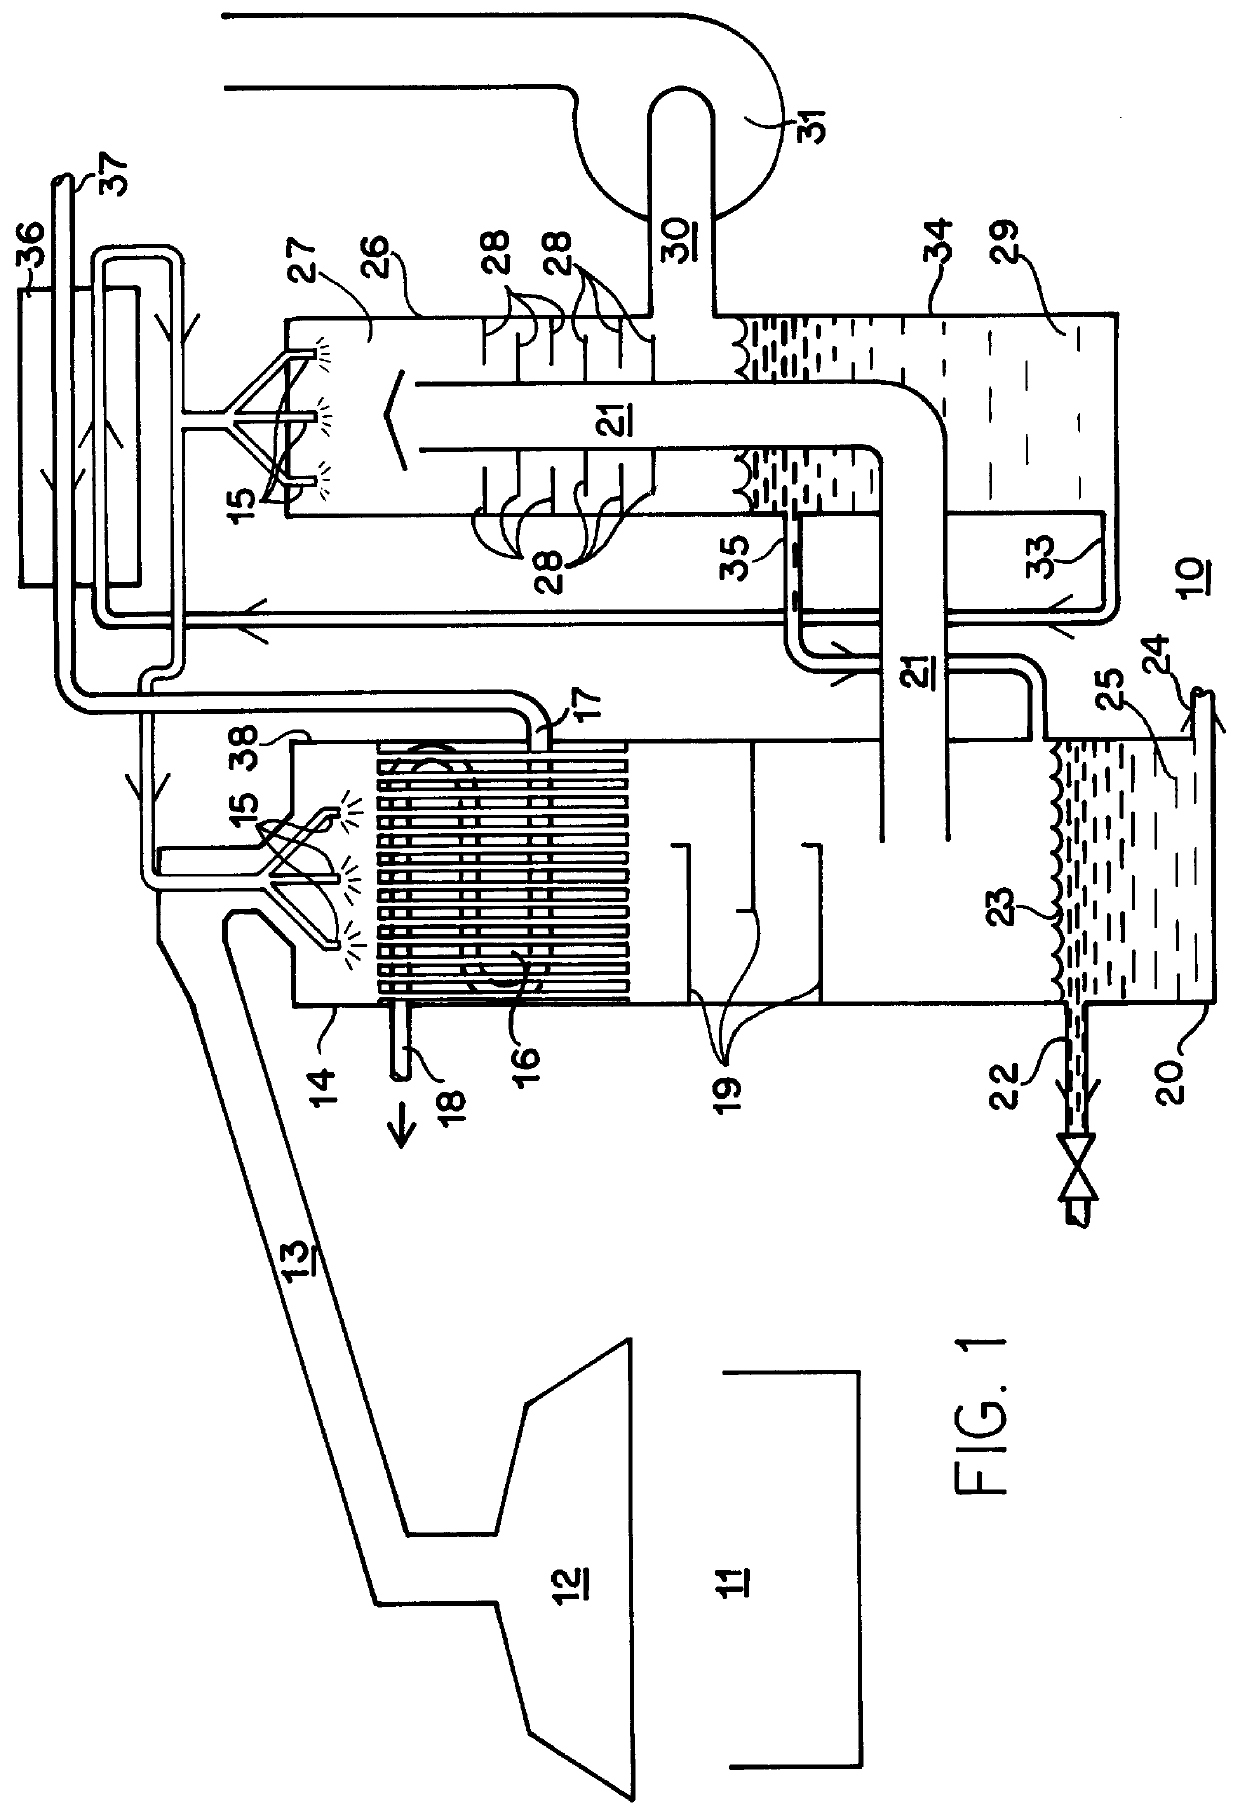 Apparatus and method for extracting heat from contaminated waste steam